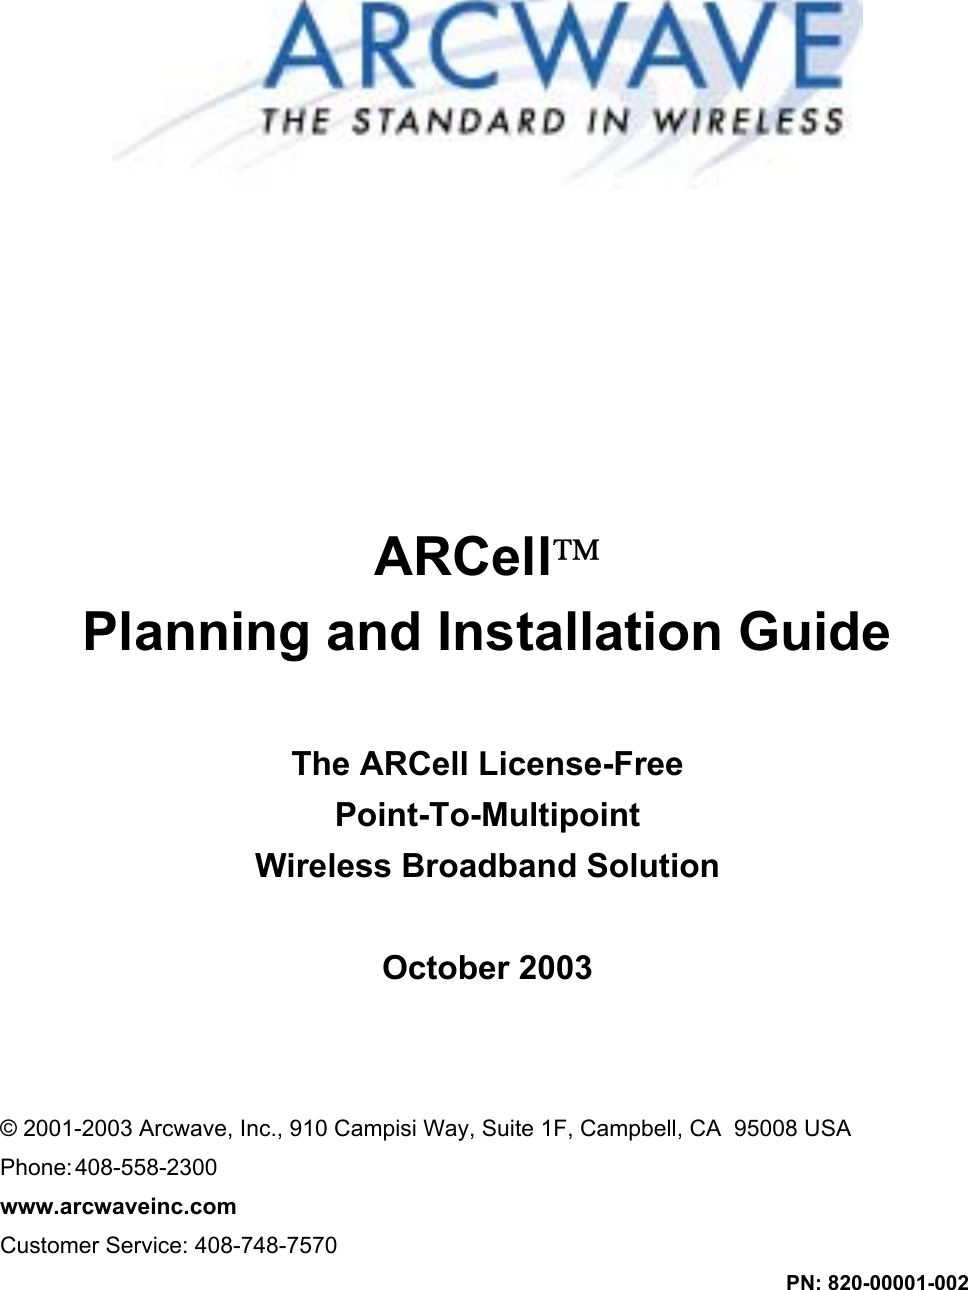  ARCell  Planning and Installation Guide  The ARCell License-Free Point-To-Multipoint Wireless Broadband Solution  October 2003    © 2001-2003 Arcwave, Inc., 910 Campisi Way, Suite 1F, Campbell, CA  95008 USA Phone: 408-558-2300 www.arcwaveinc.com Customer Service: 408-748-7570 PN: 820-00001-002  